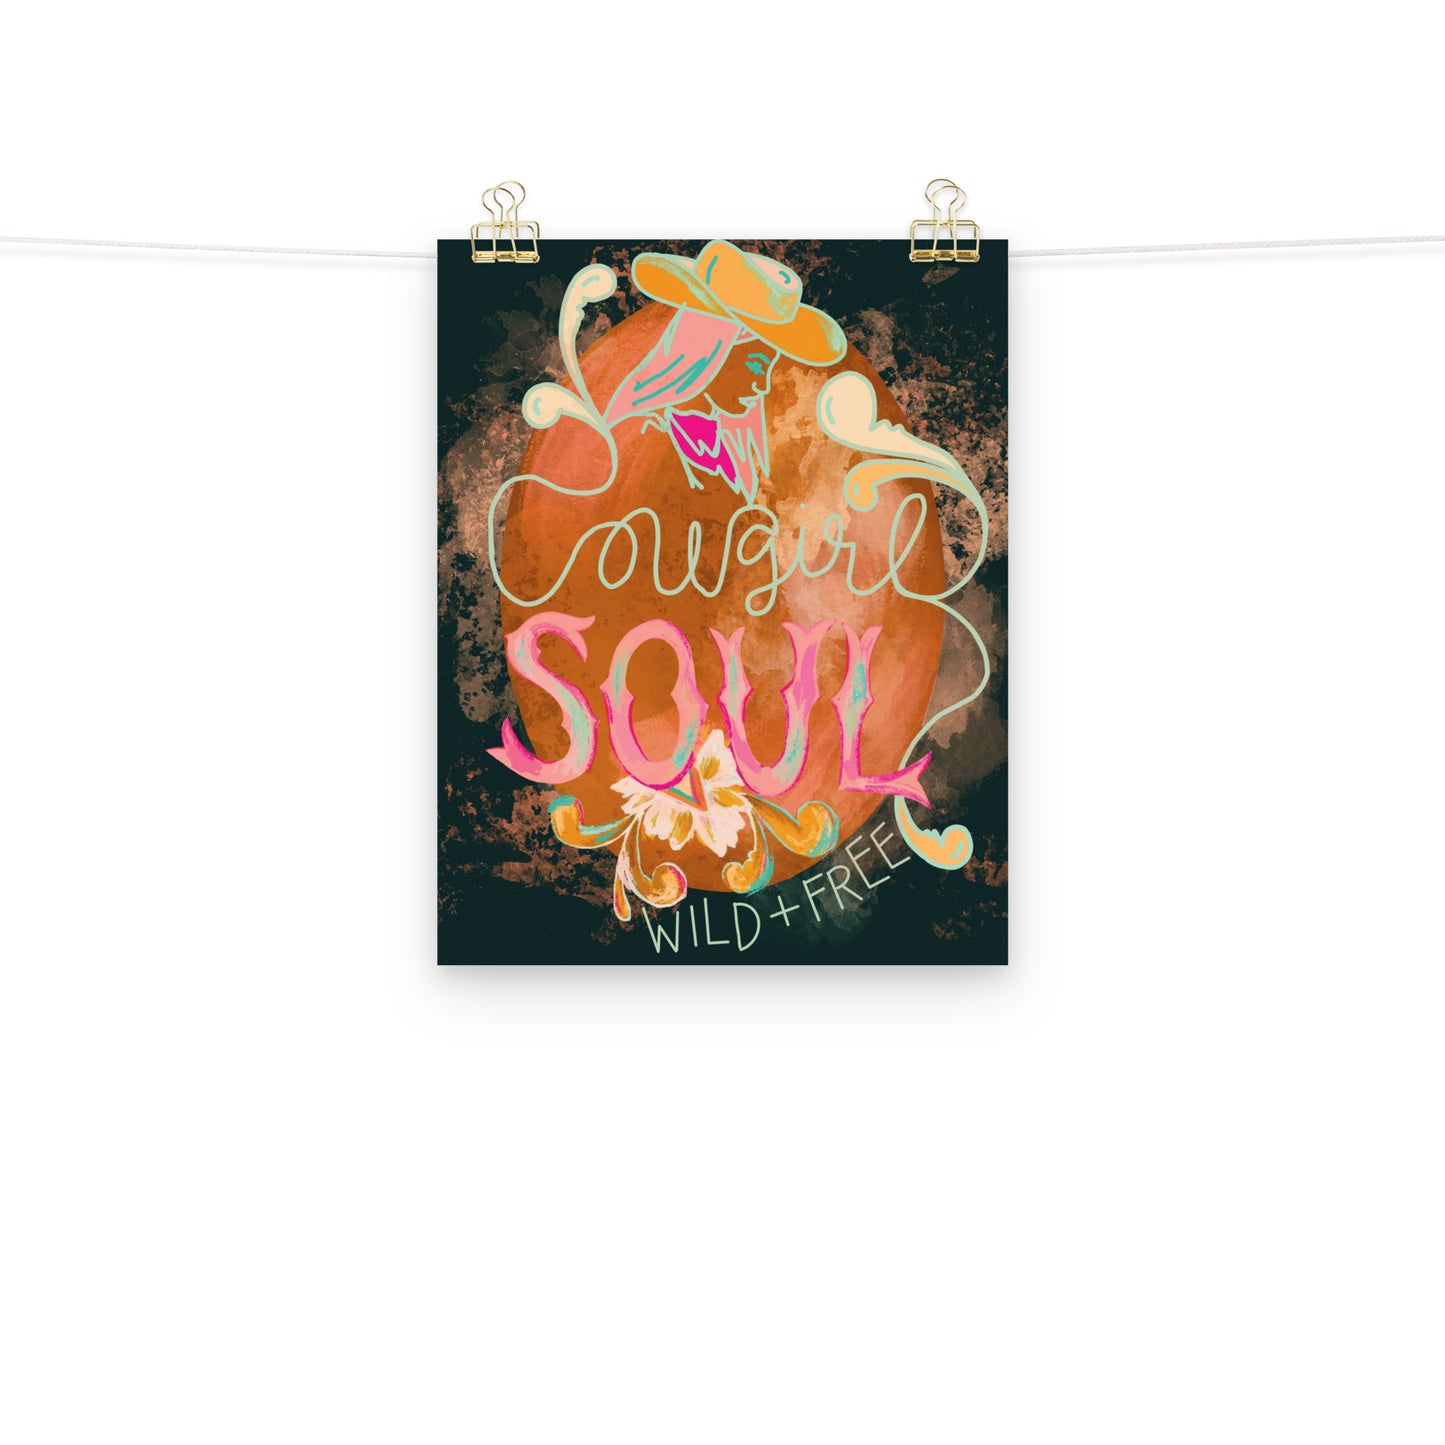 Cowgirl Soul Wild and Free Art Print